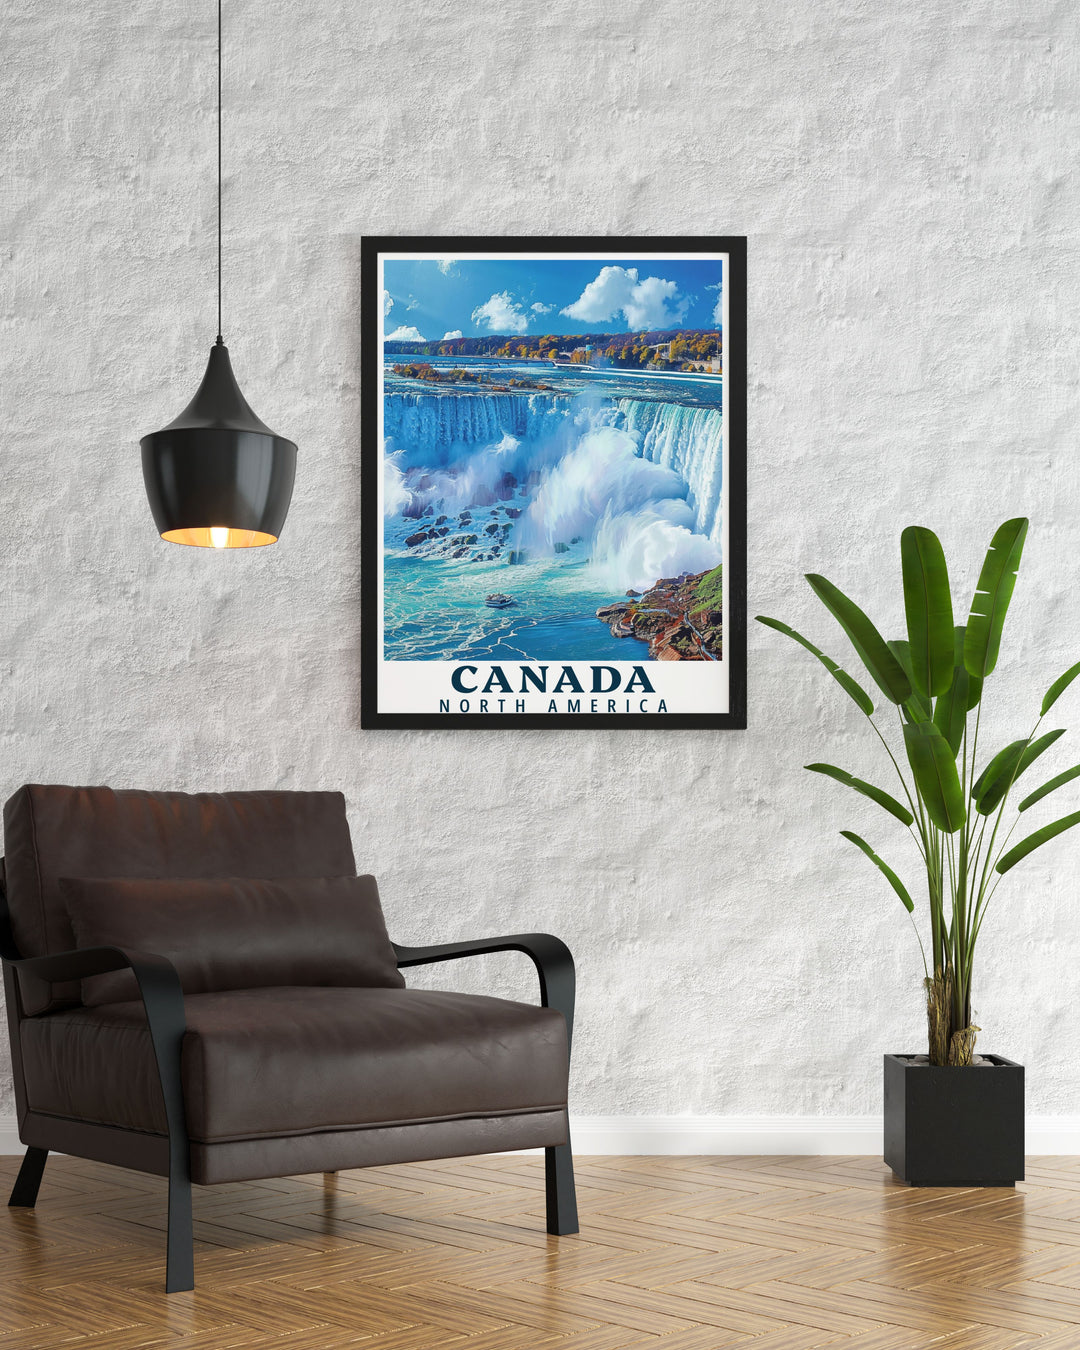 Highlighting the thunderous presence of Niagara Falls and the vibrant surroundings, this travel poster is perfect for those who appreciate the natural and historical richness of Canada.